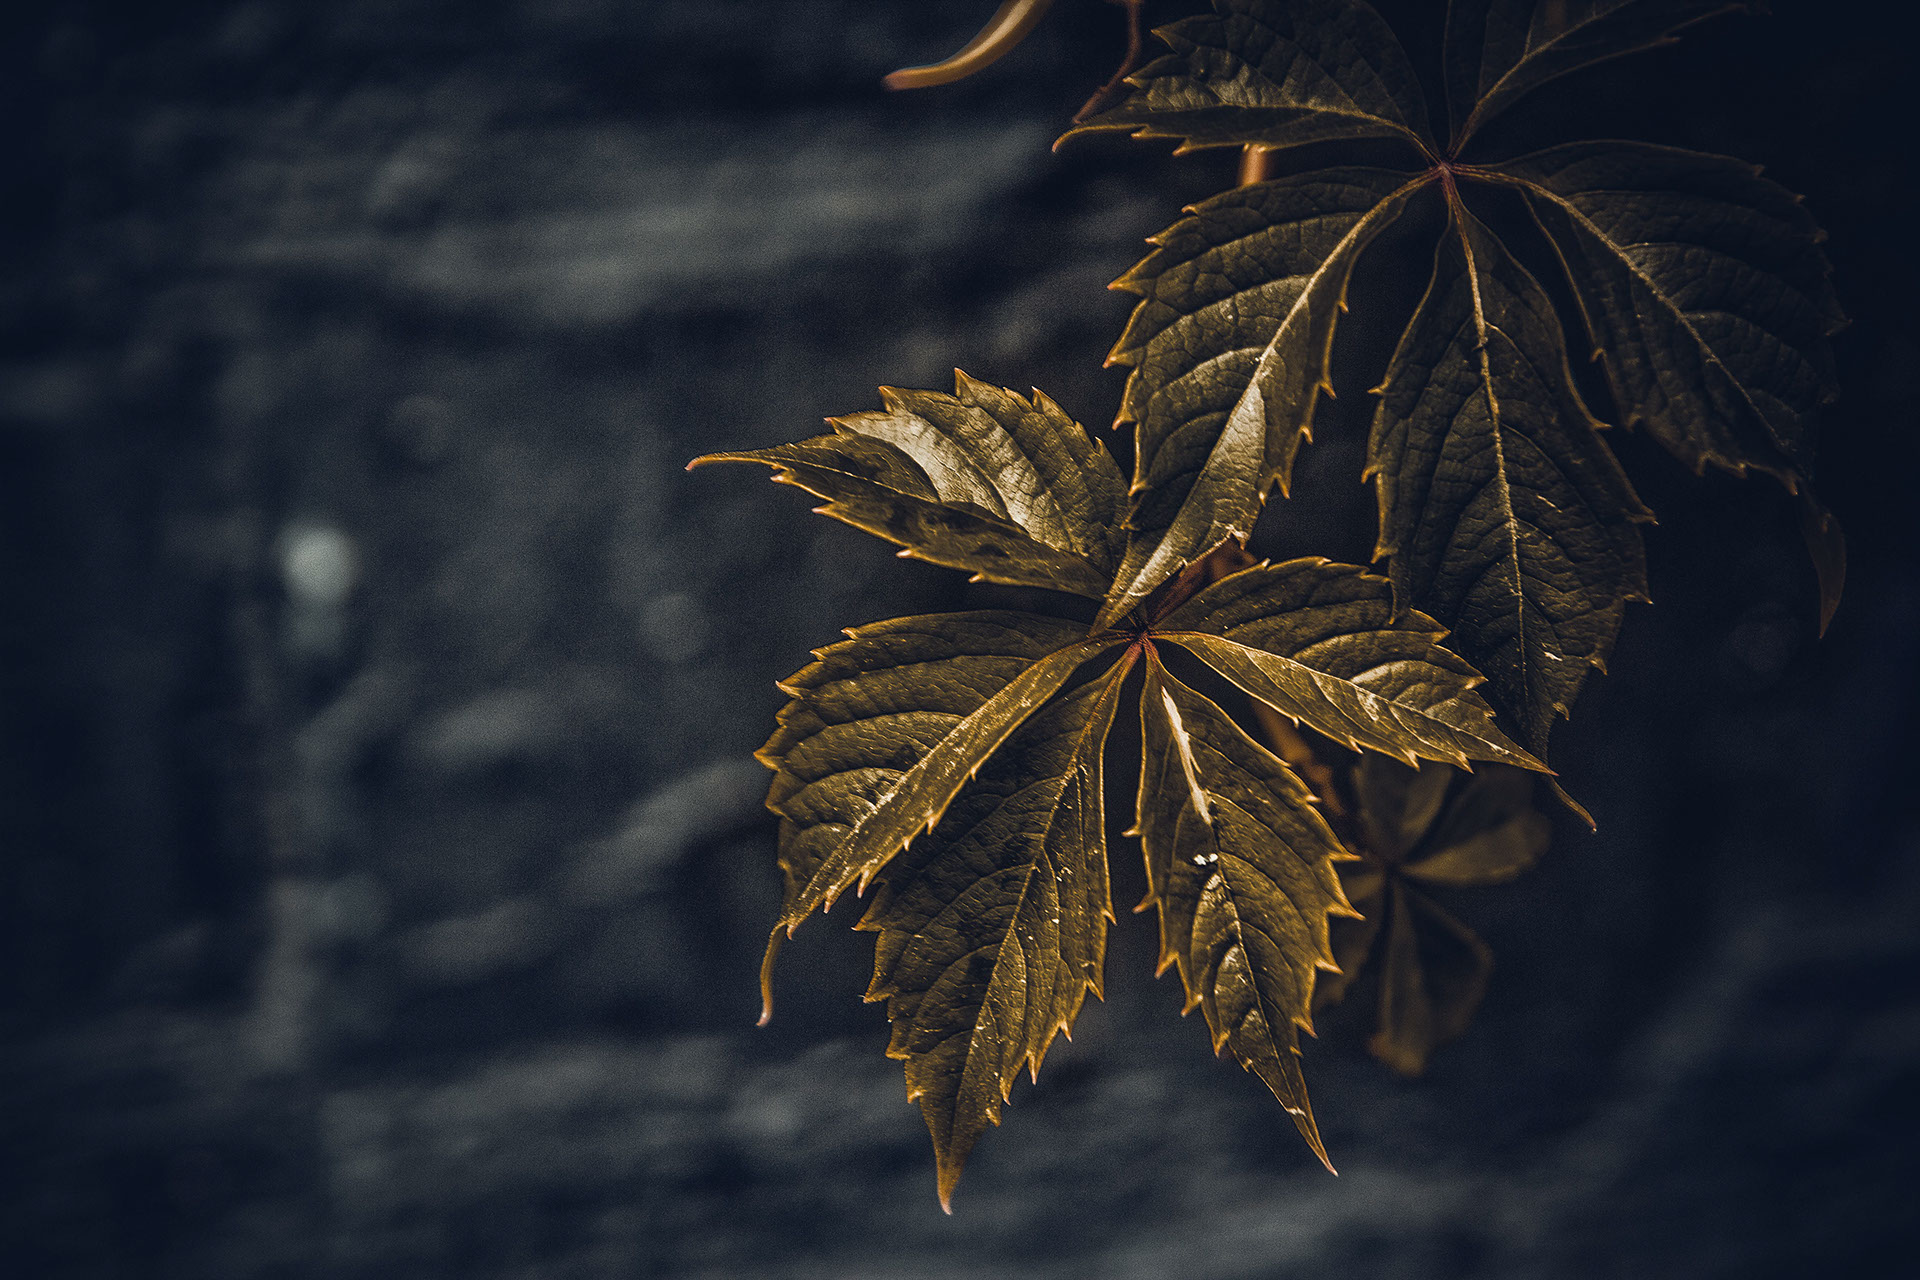 Colors of autumn on Behance